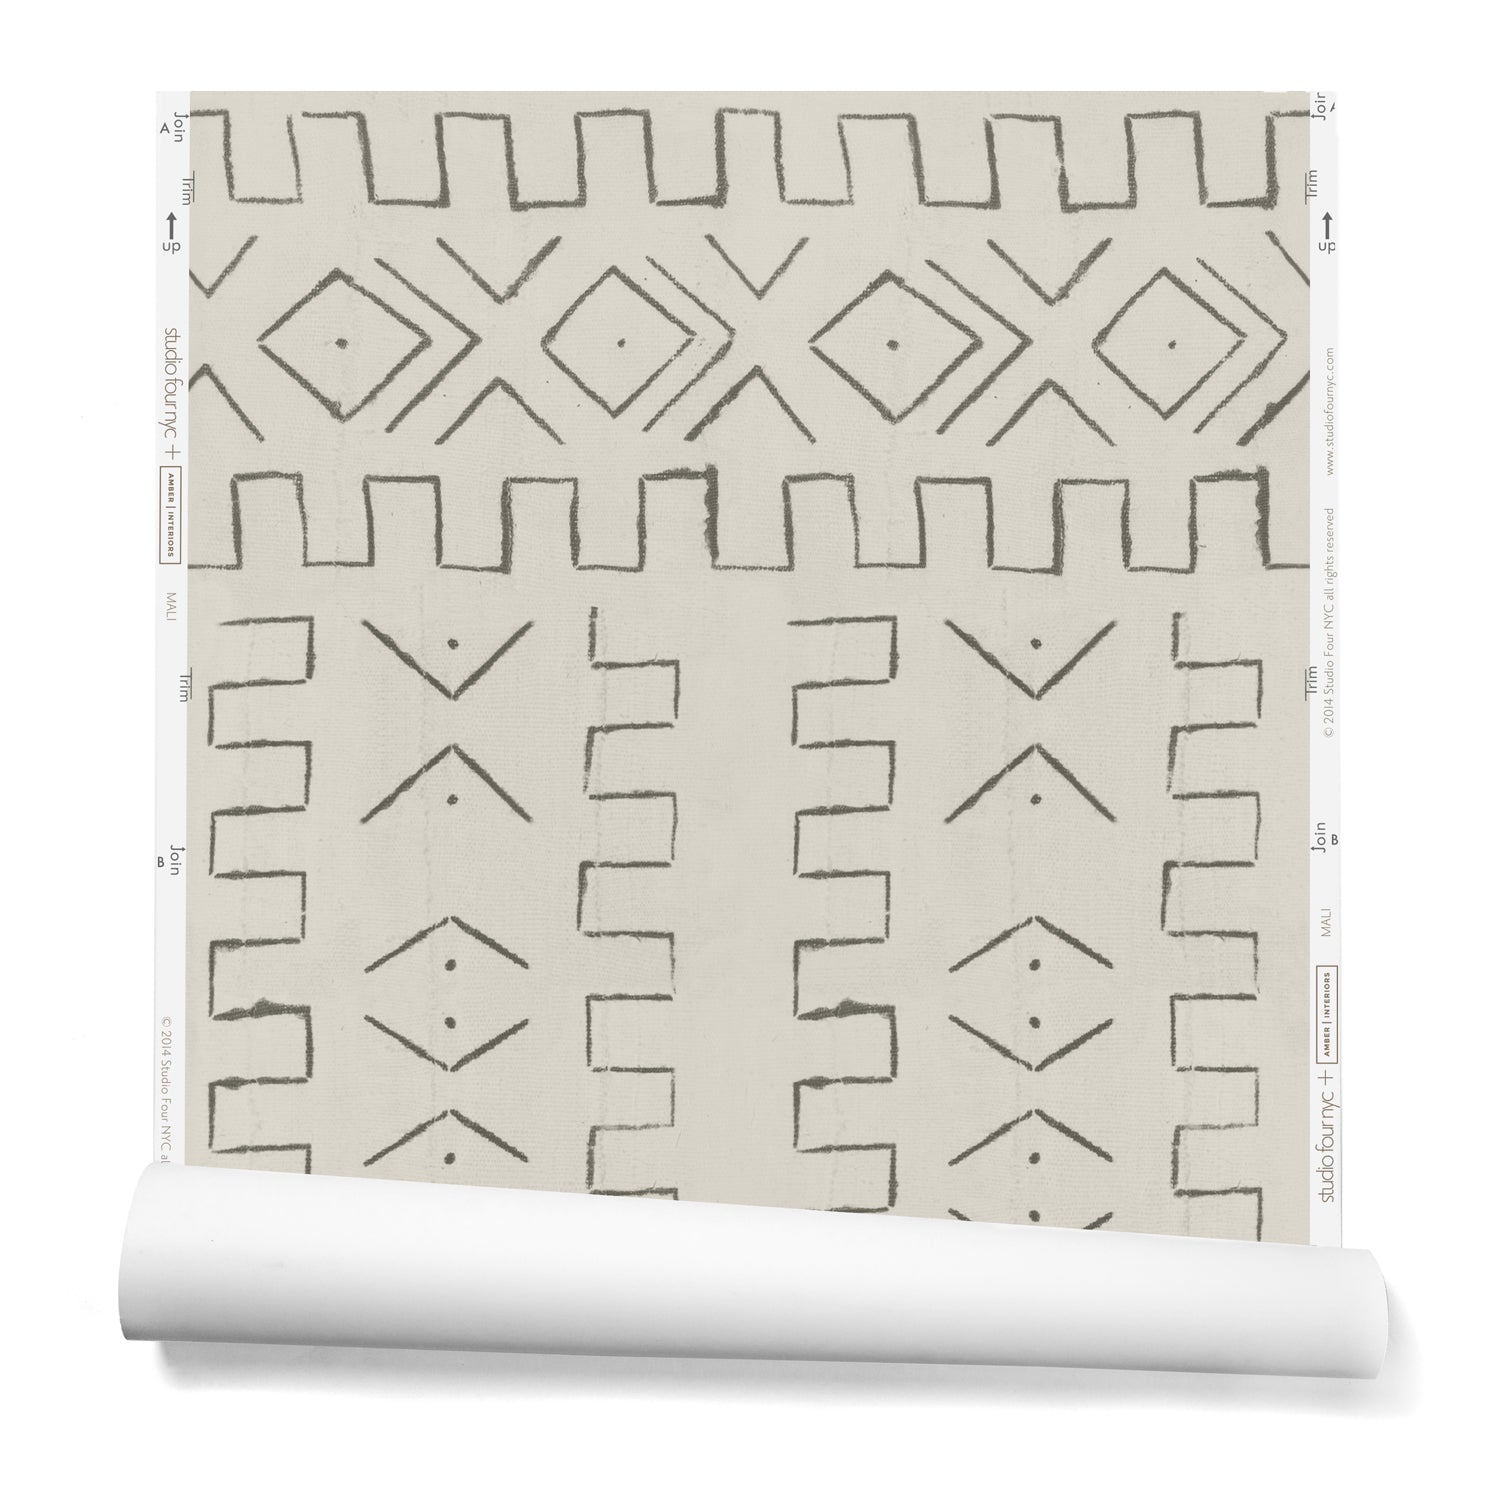 A partially unrolled roll of wallpaper in a minimalist African-inspired line design of painted gray on a beige background.